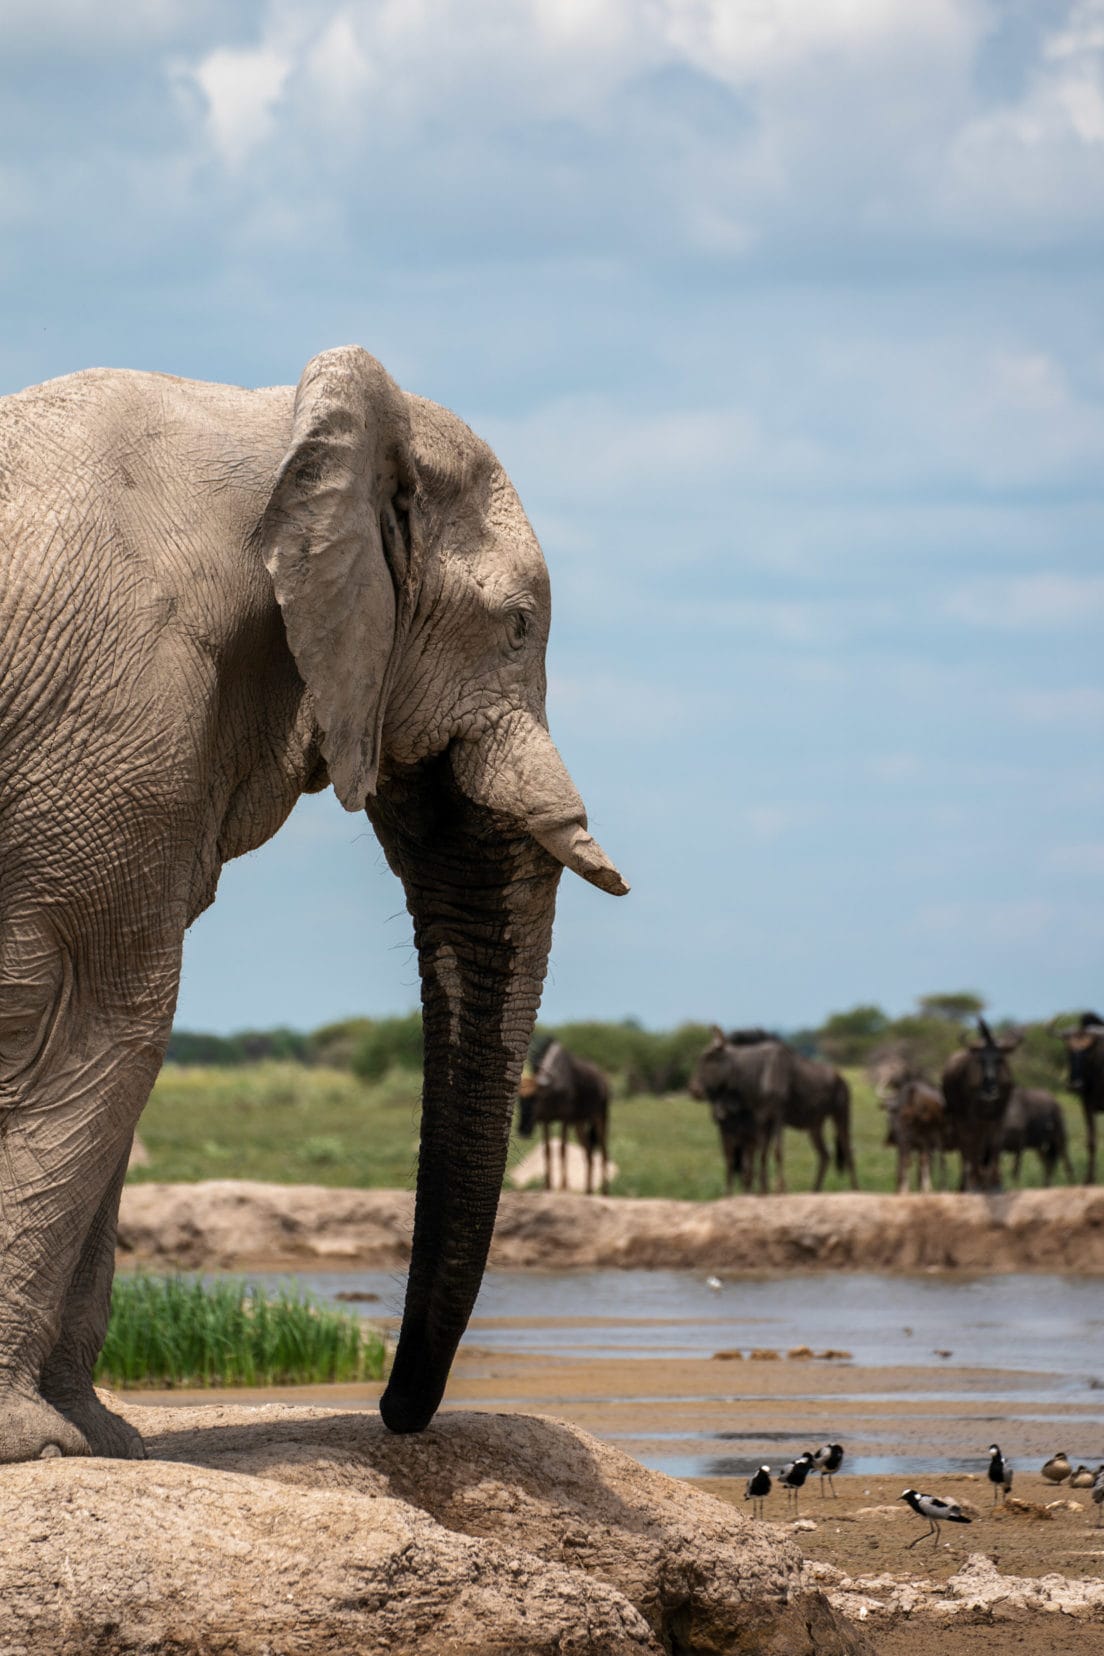 Elephant at waterhole with wildebeest in background